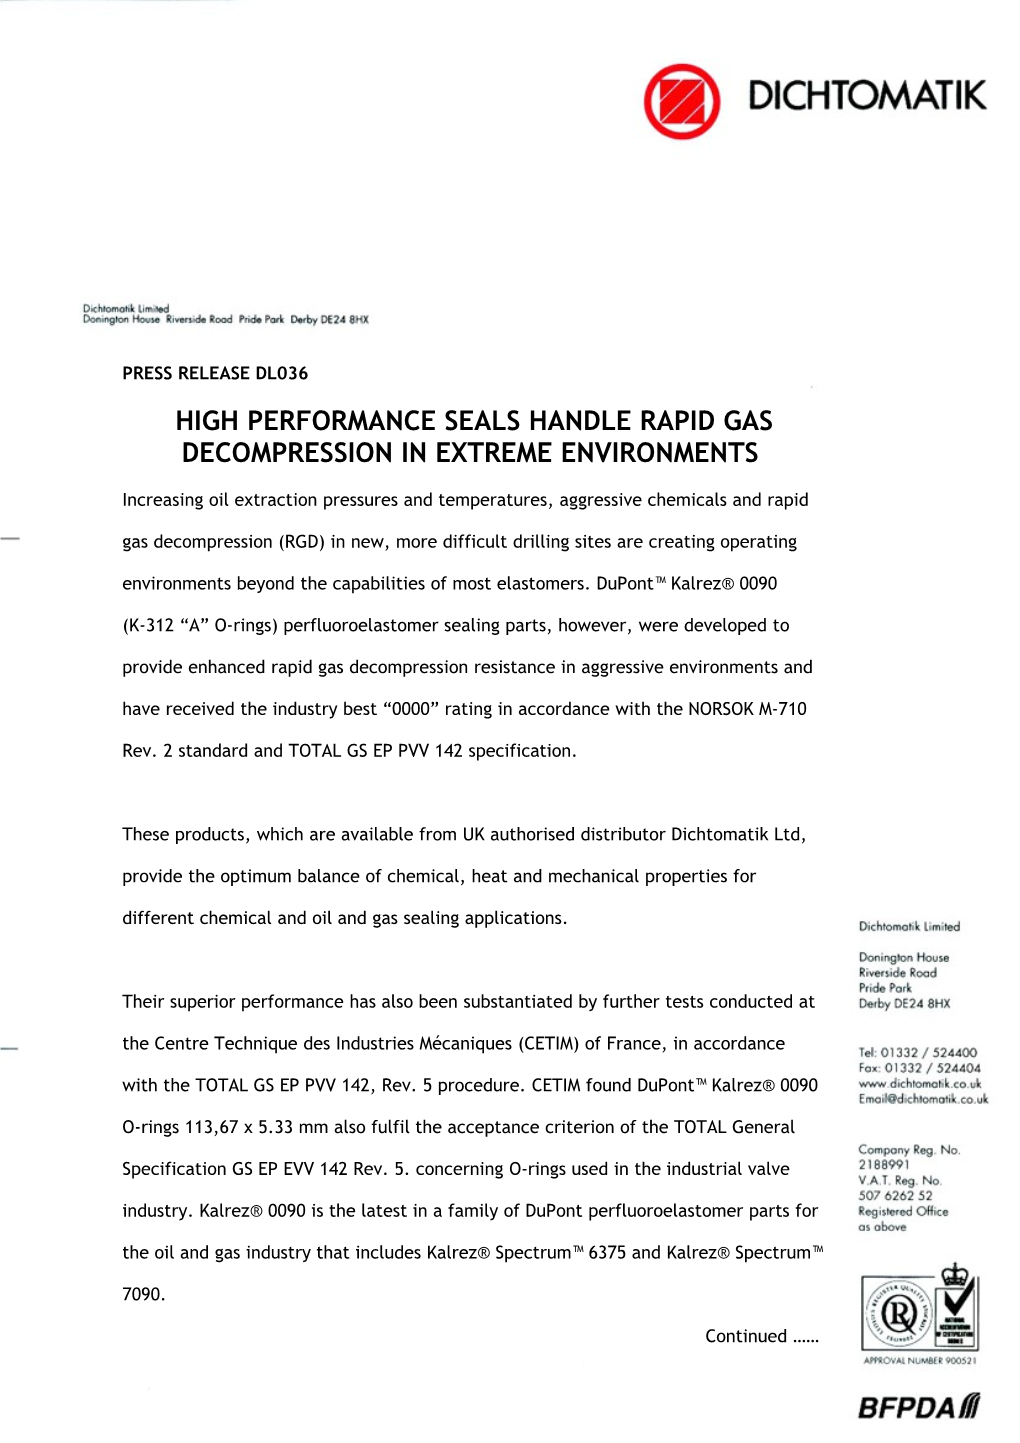 High Performance Seals Handle Rapid Gas Decompression in Extreme Environments